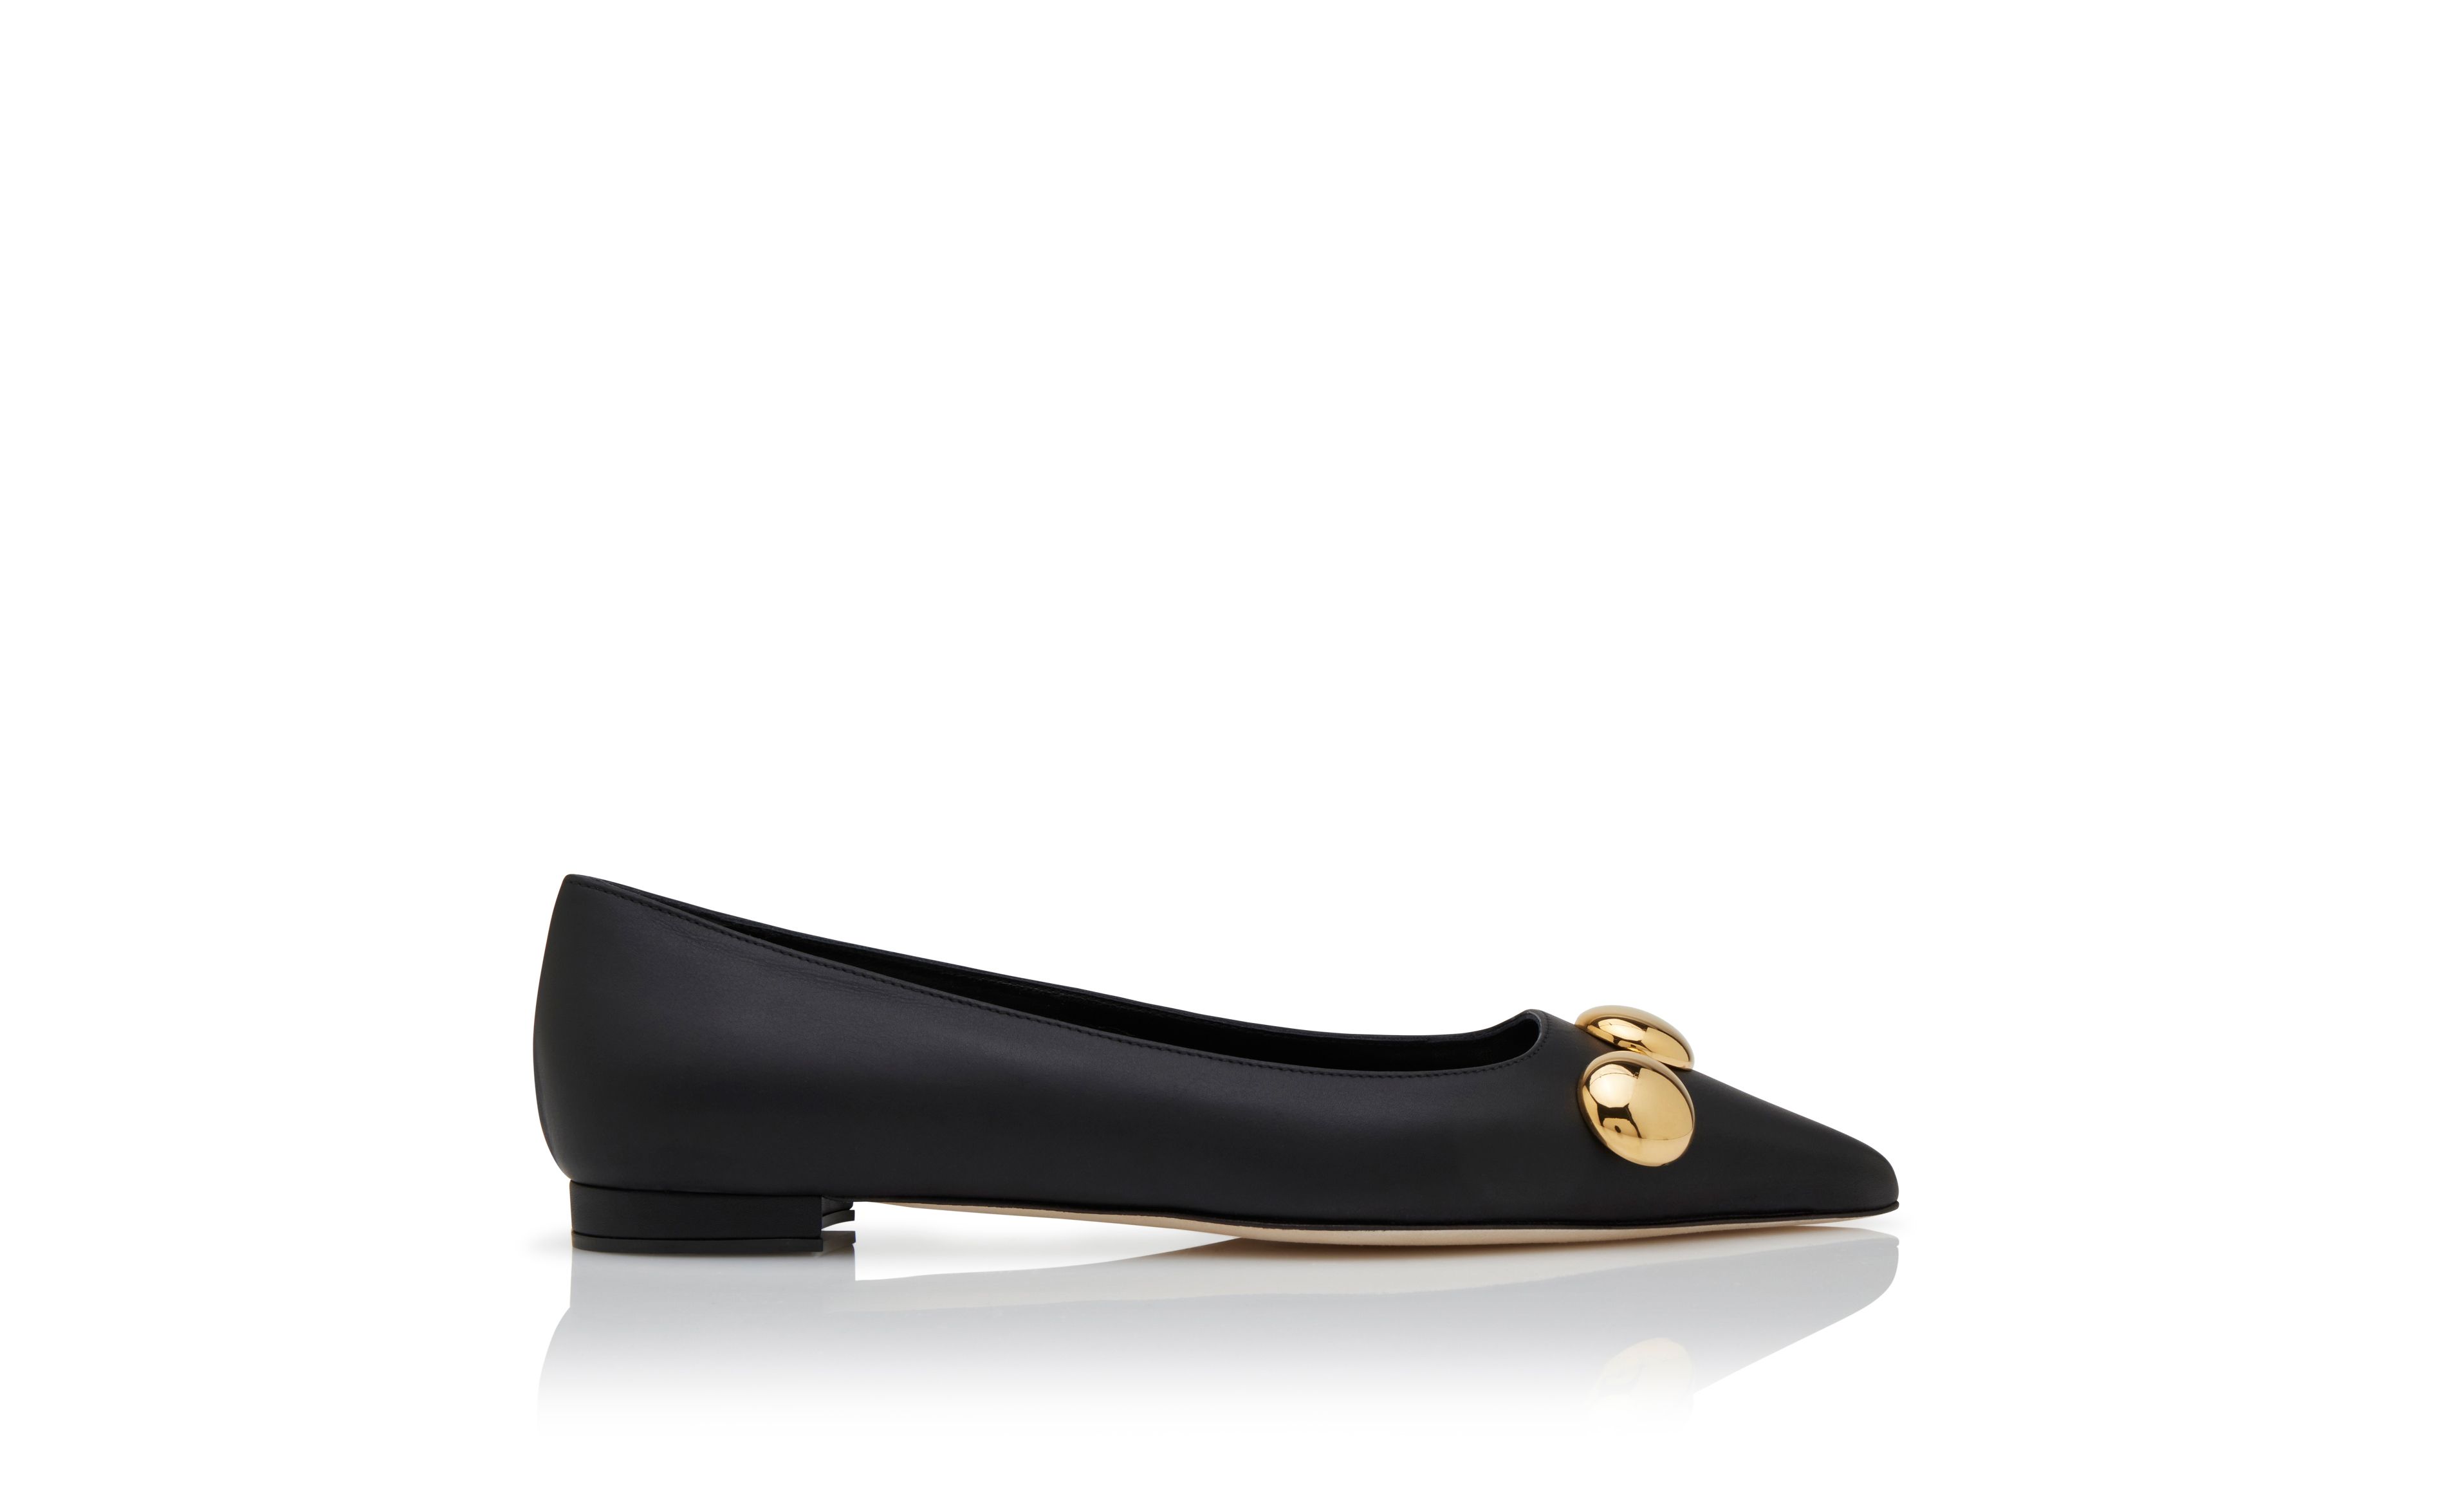 Designer Black Calf Leather Pointed Toe Flat Pumps - Image Side View